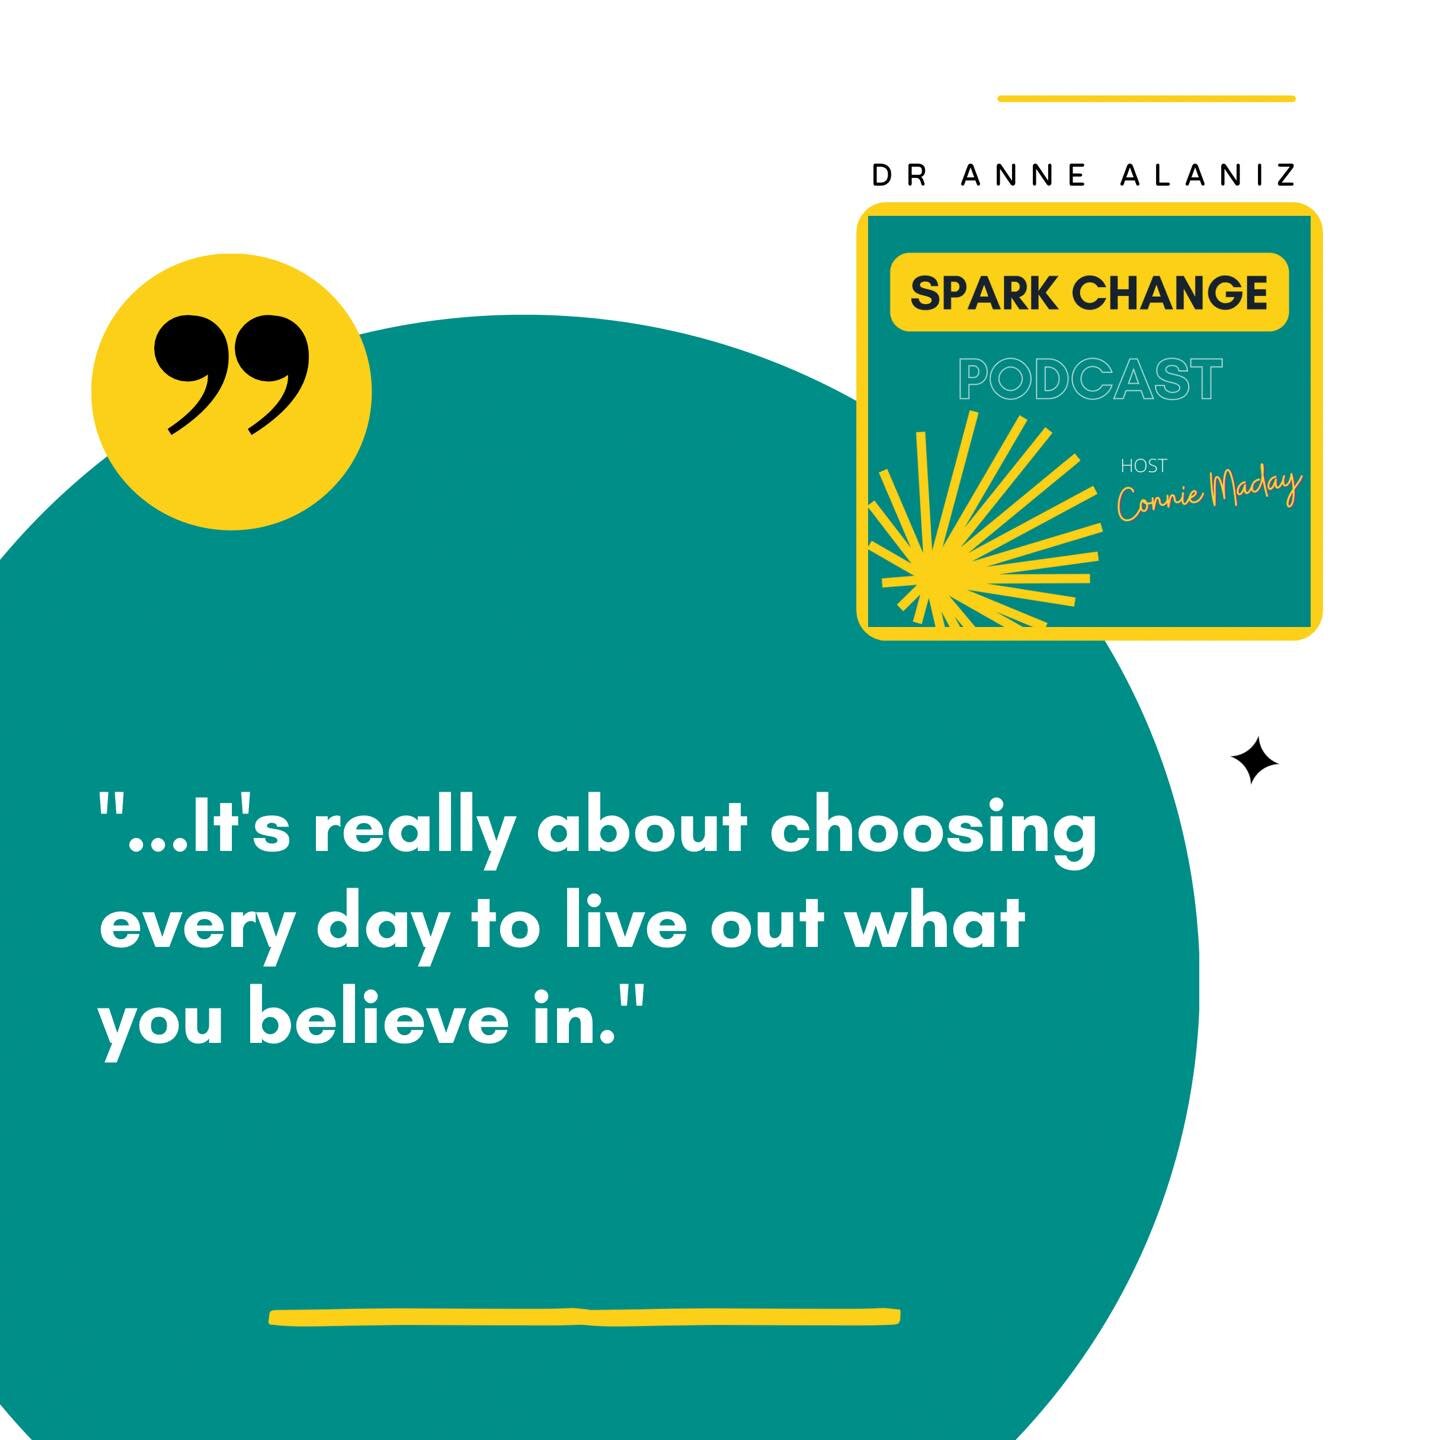 &quot;...It's really about choosing every day to live out what you believe in.&quot; - Dr Anne Alaniz

To learn more or donate to @pothawira_international visit pothawira.org

#sparkchange  #podcast #podcaster #educatorsofinstagram #sparktoempower #c